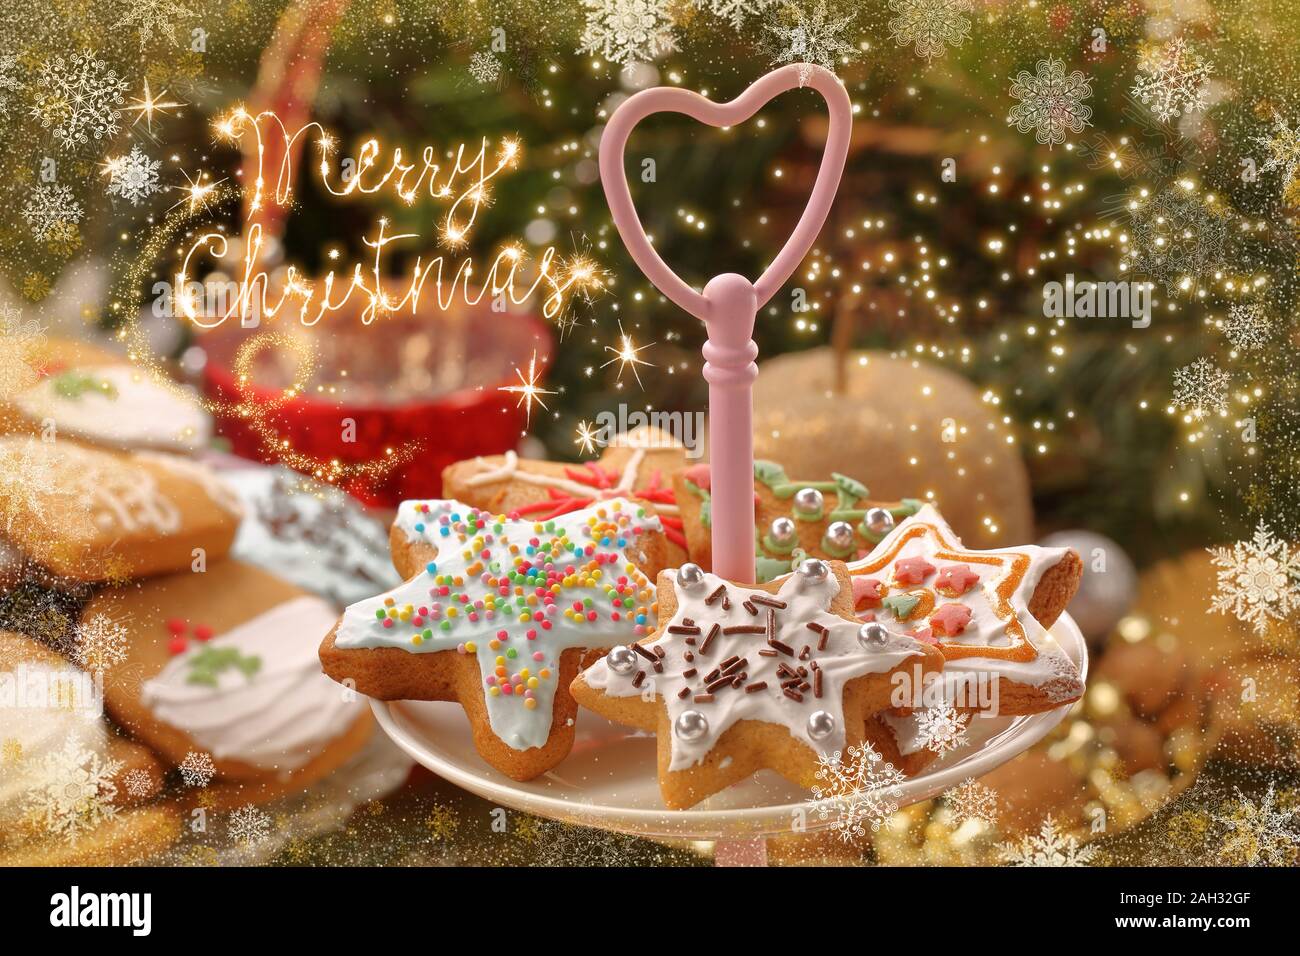 Christmas cookies with decorations on wooden background with merry christmas inscription Stock Photo